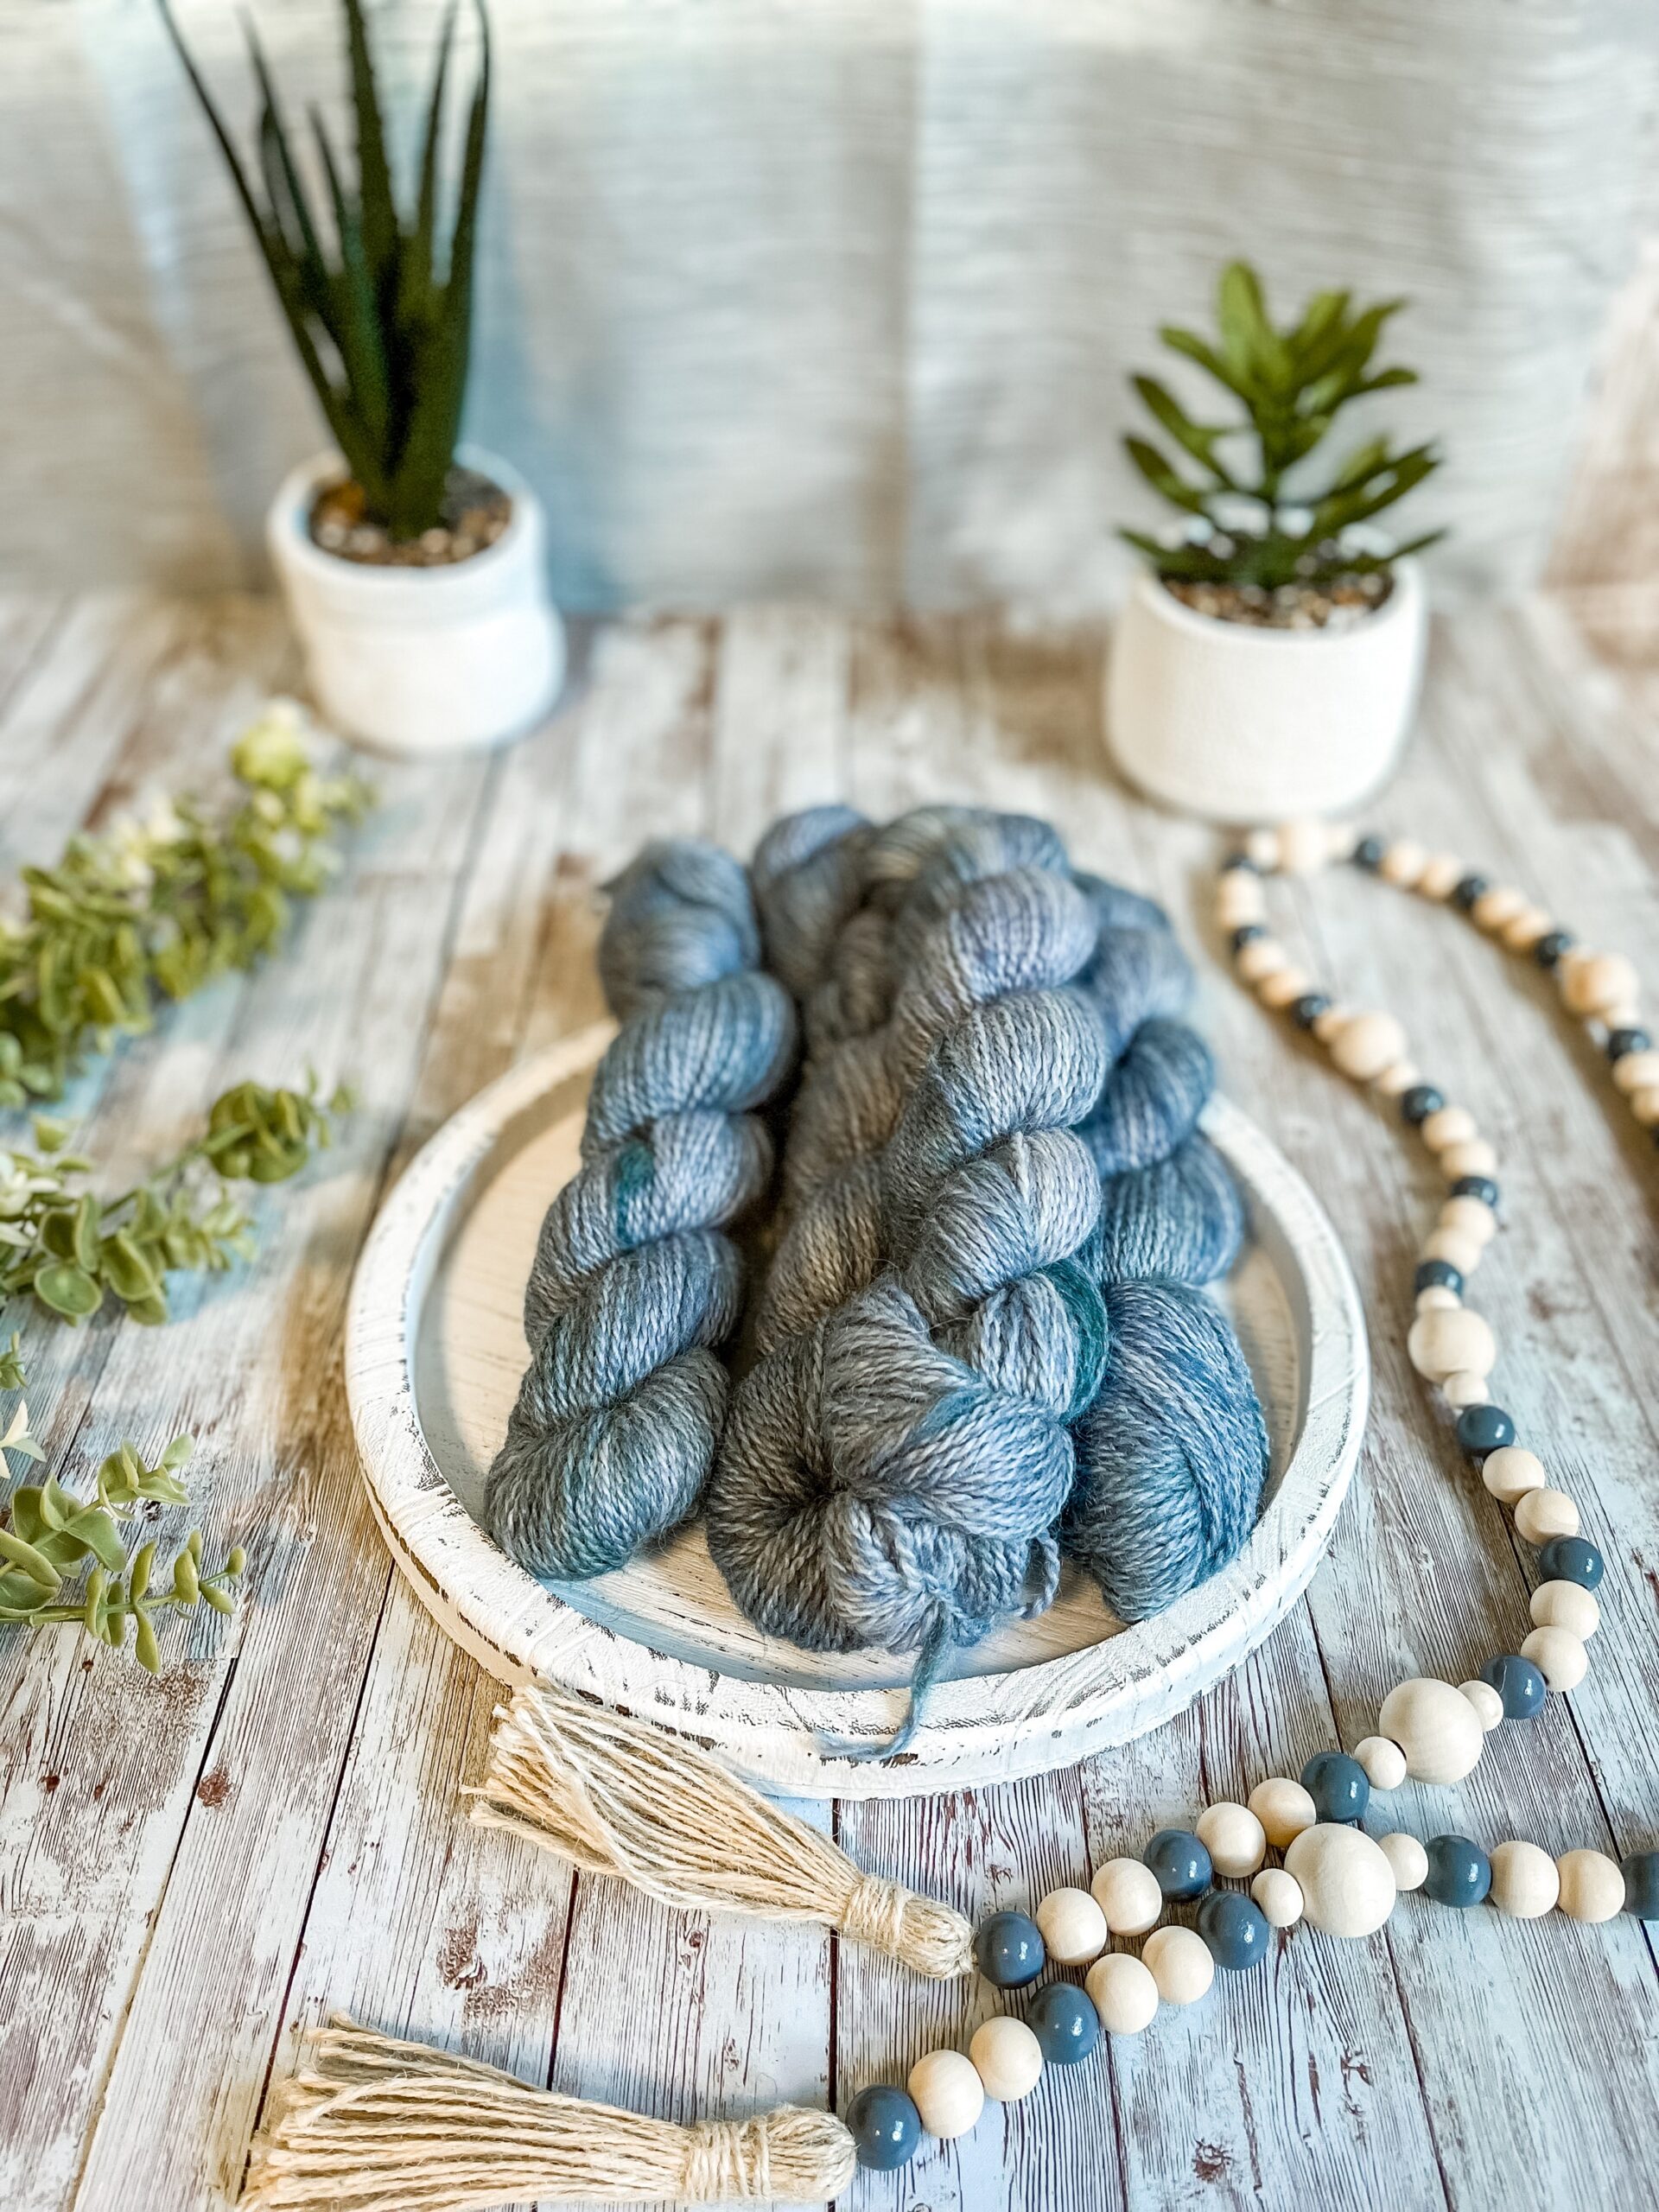 5 skeins of hand-dyed, blue yarn rest on a white wooden trivet. A strand of beads is draped to the right, some greenery is on the left, and 2 succulent plants are in the background.